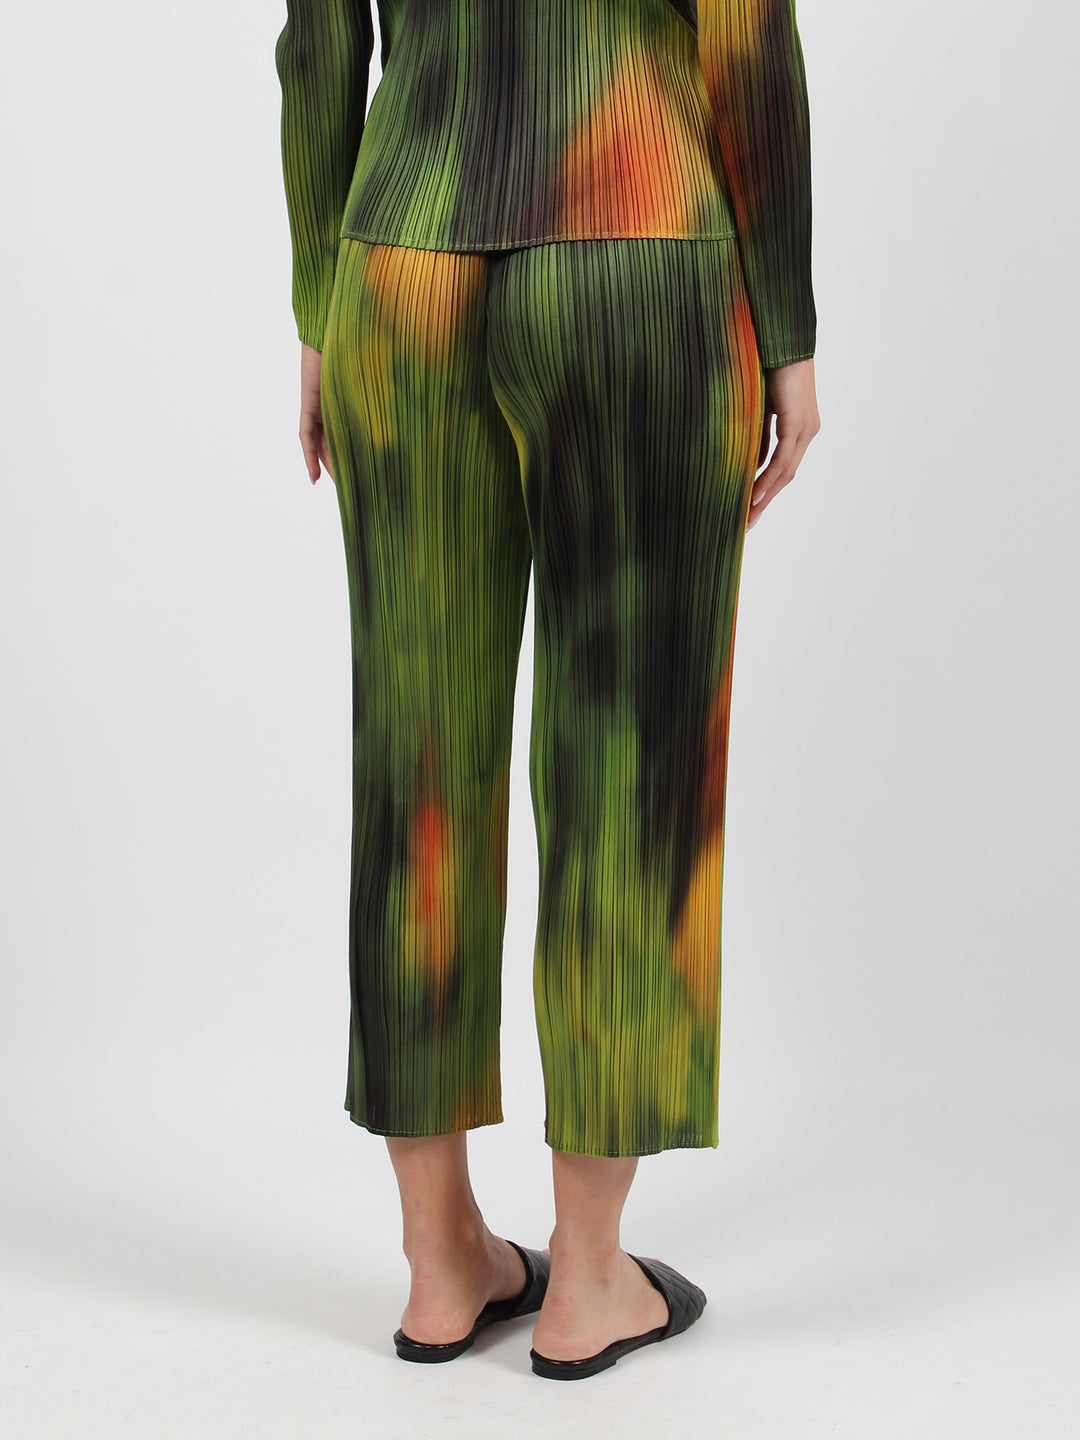 Turnip & spinach trousers